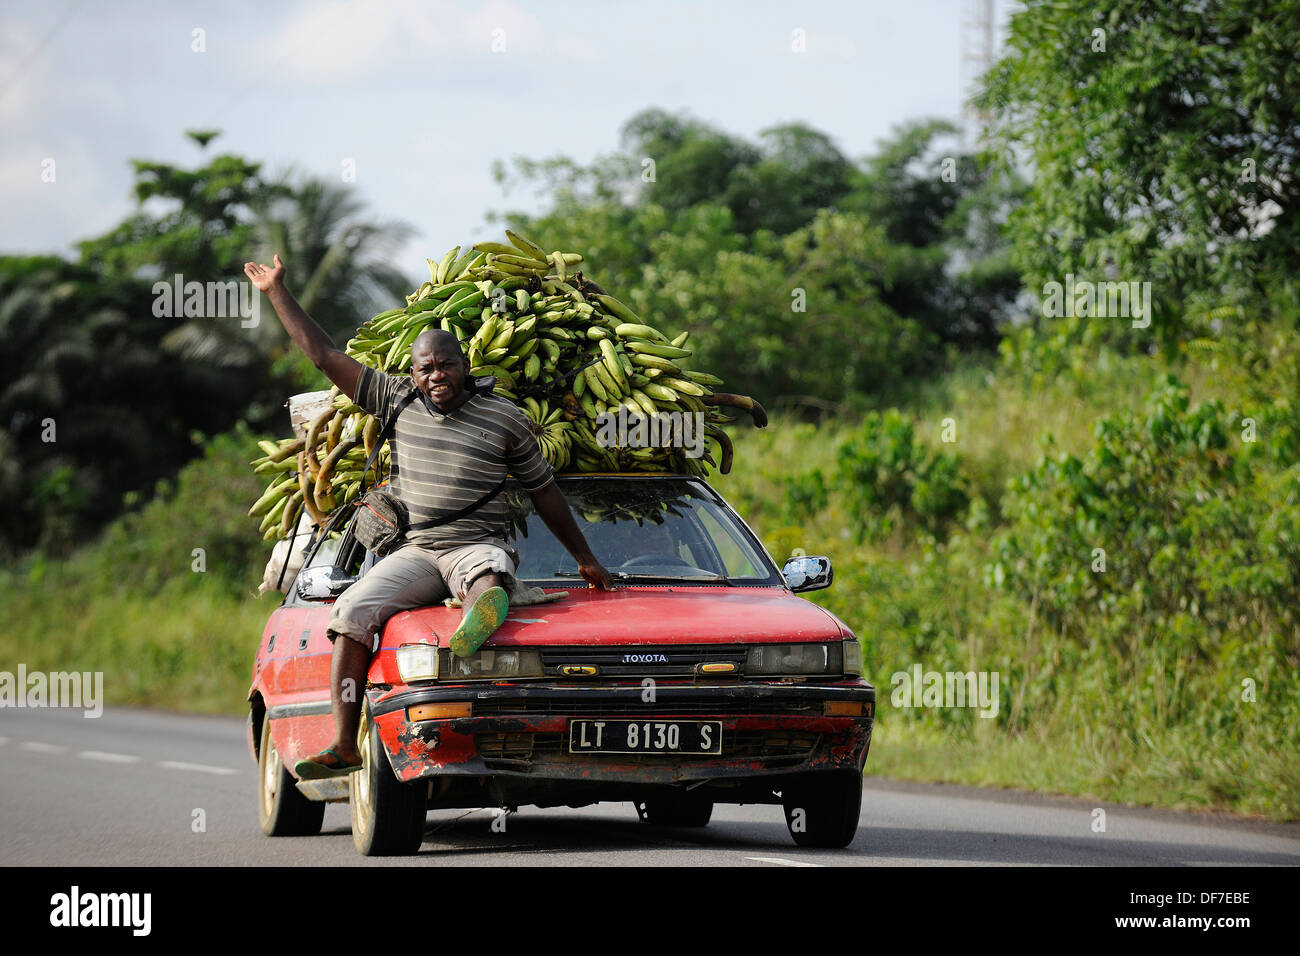 Bananas being transported on a car, Kribi, South Region, Cameroon Stock Photo